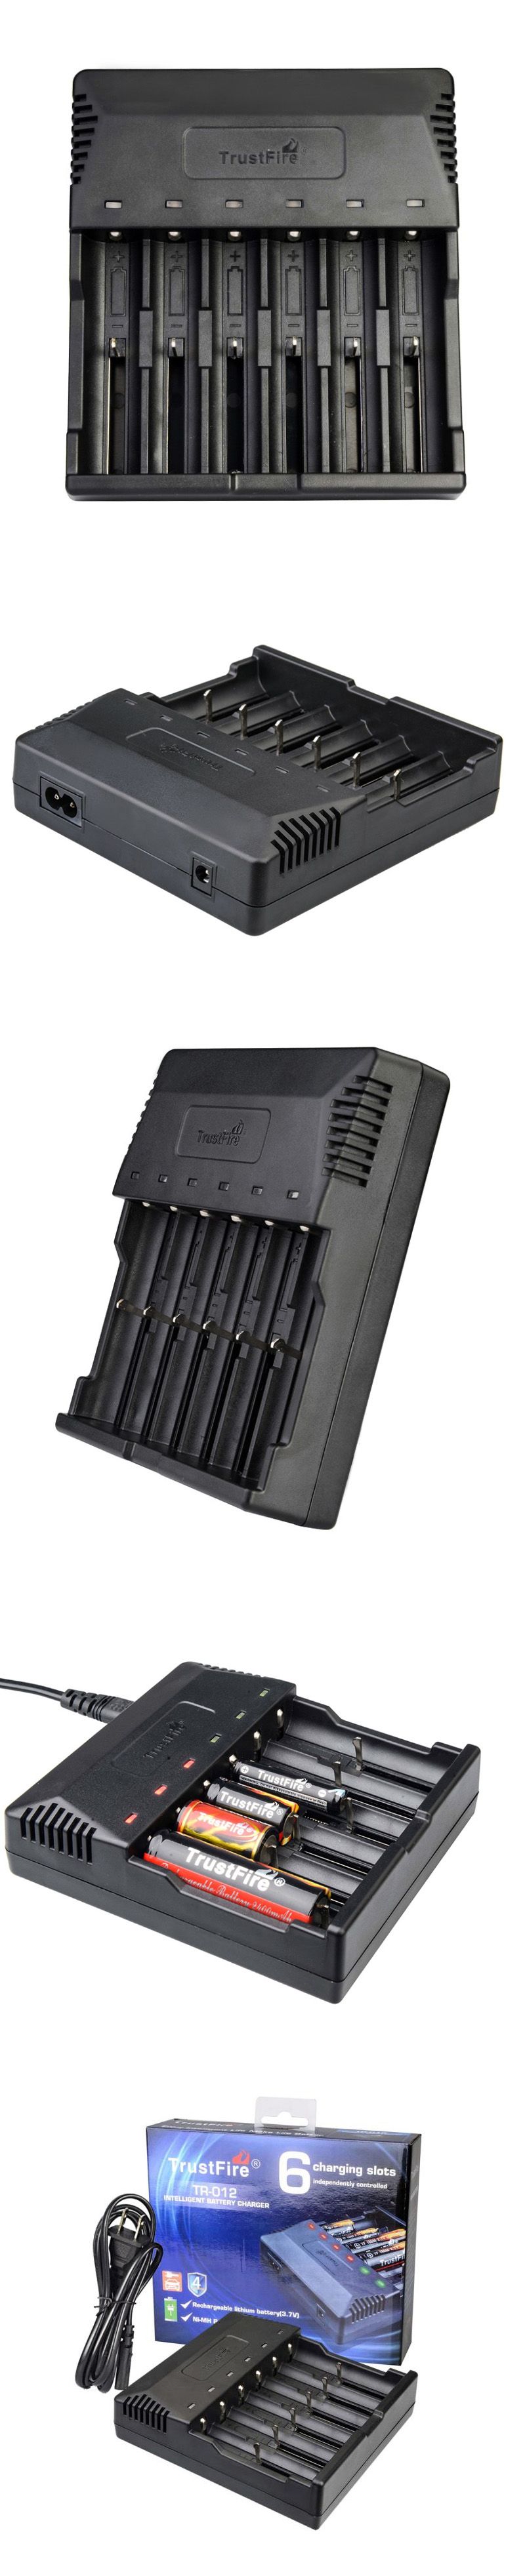 TrustFire-TR-012-Digicharger-Intelligent-Battery-Charger-6-Slots-Smart-Universal-Charger-EUUS-Plug-F-1462826